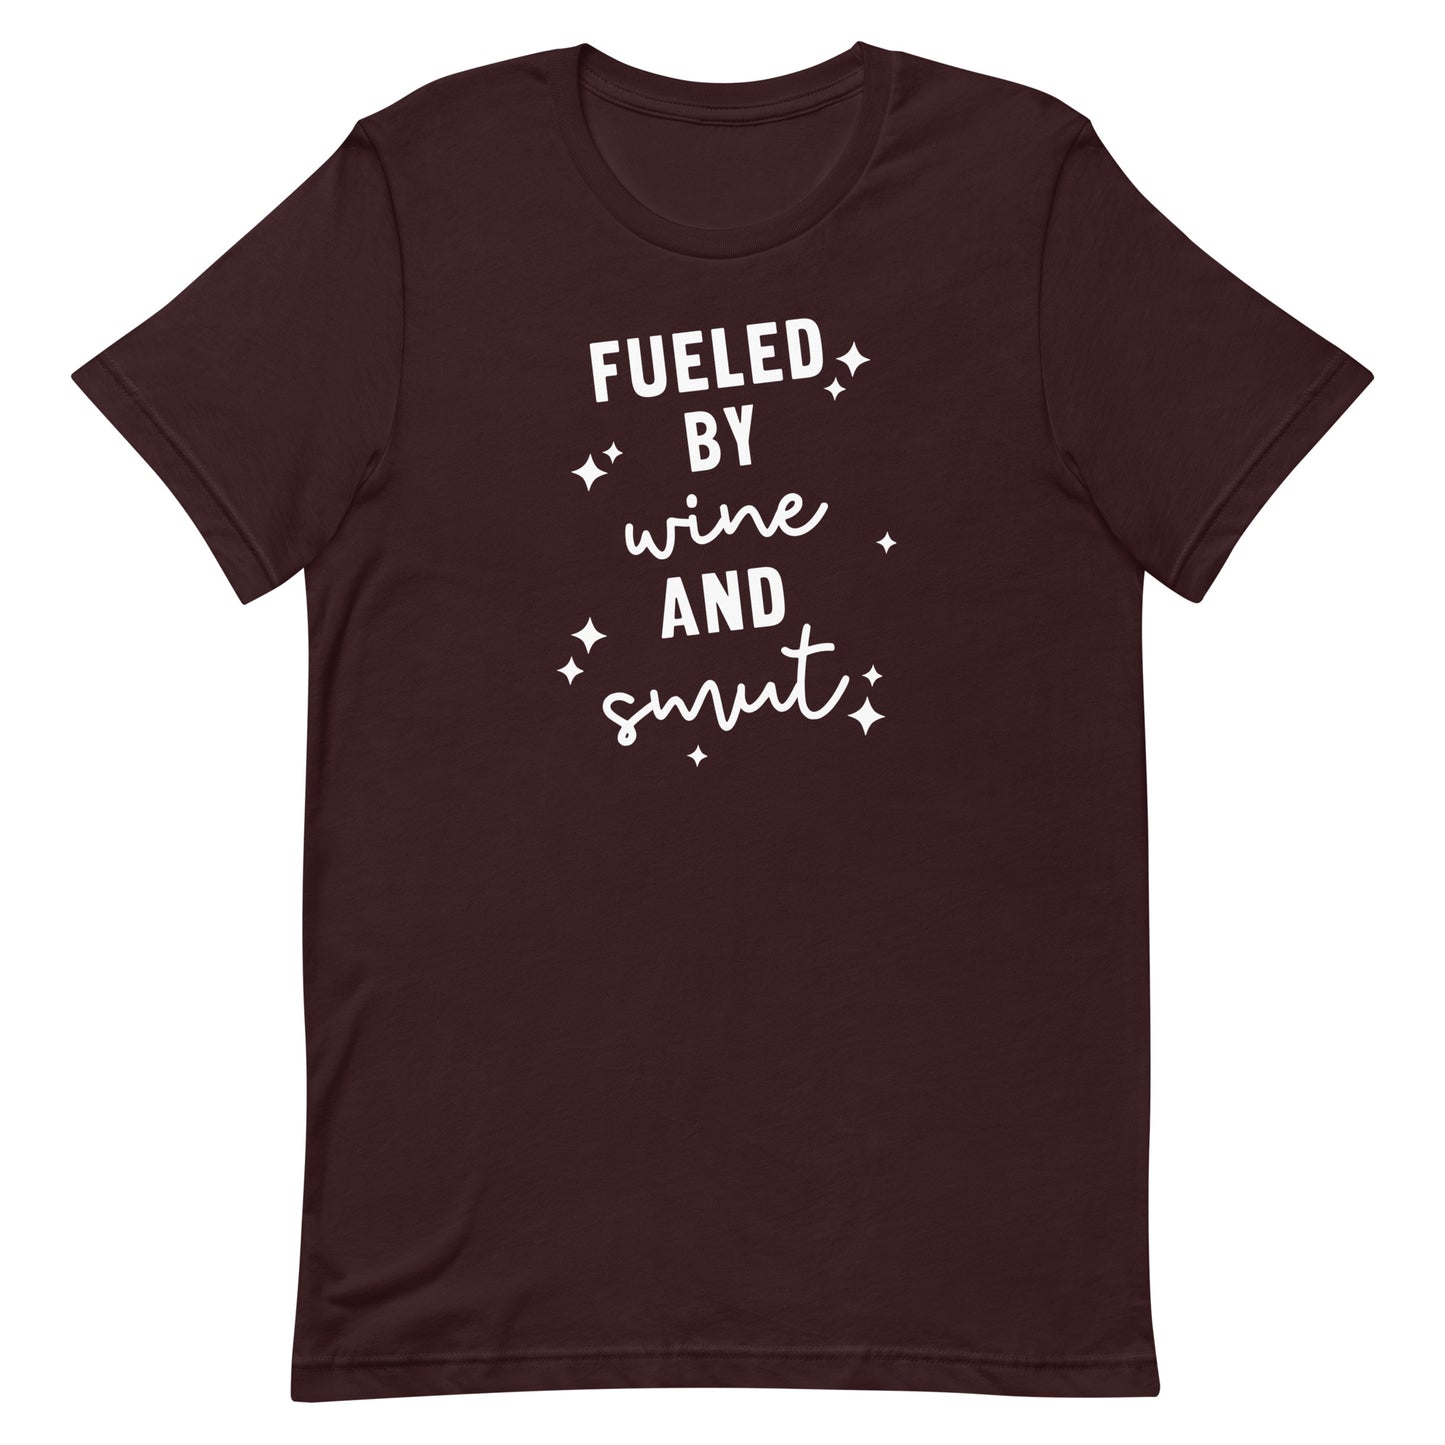 Fueled By Wine and Smut Tee